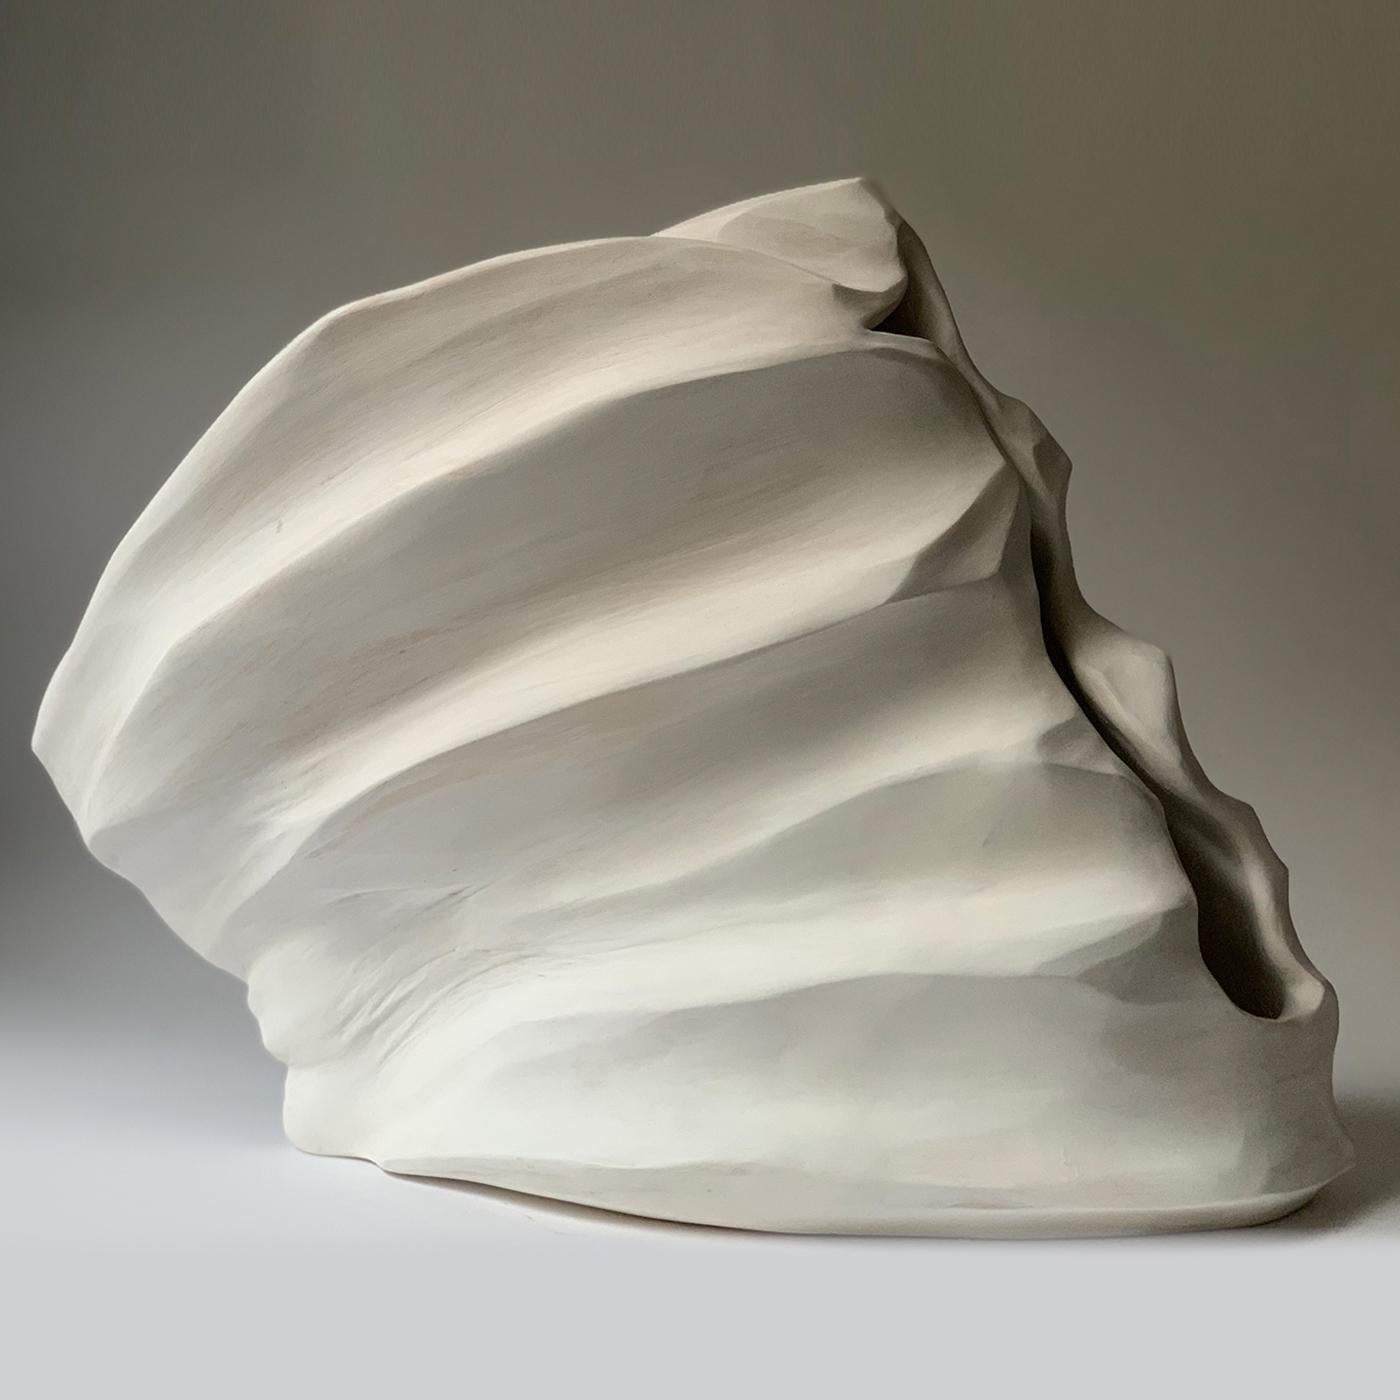 Exuding a fascinating, almost unsettling feeling in its sinuous, vertical cavity, this stupendous work of art is a ceramic sculpture that can be looked at from four different angles, every single one of them revolving around the main, intriguing